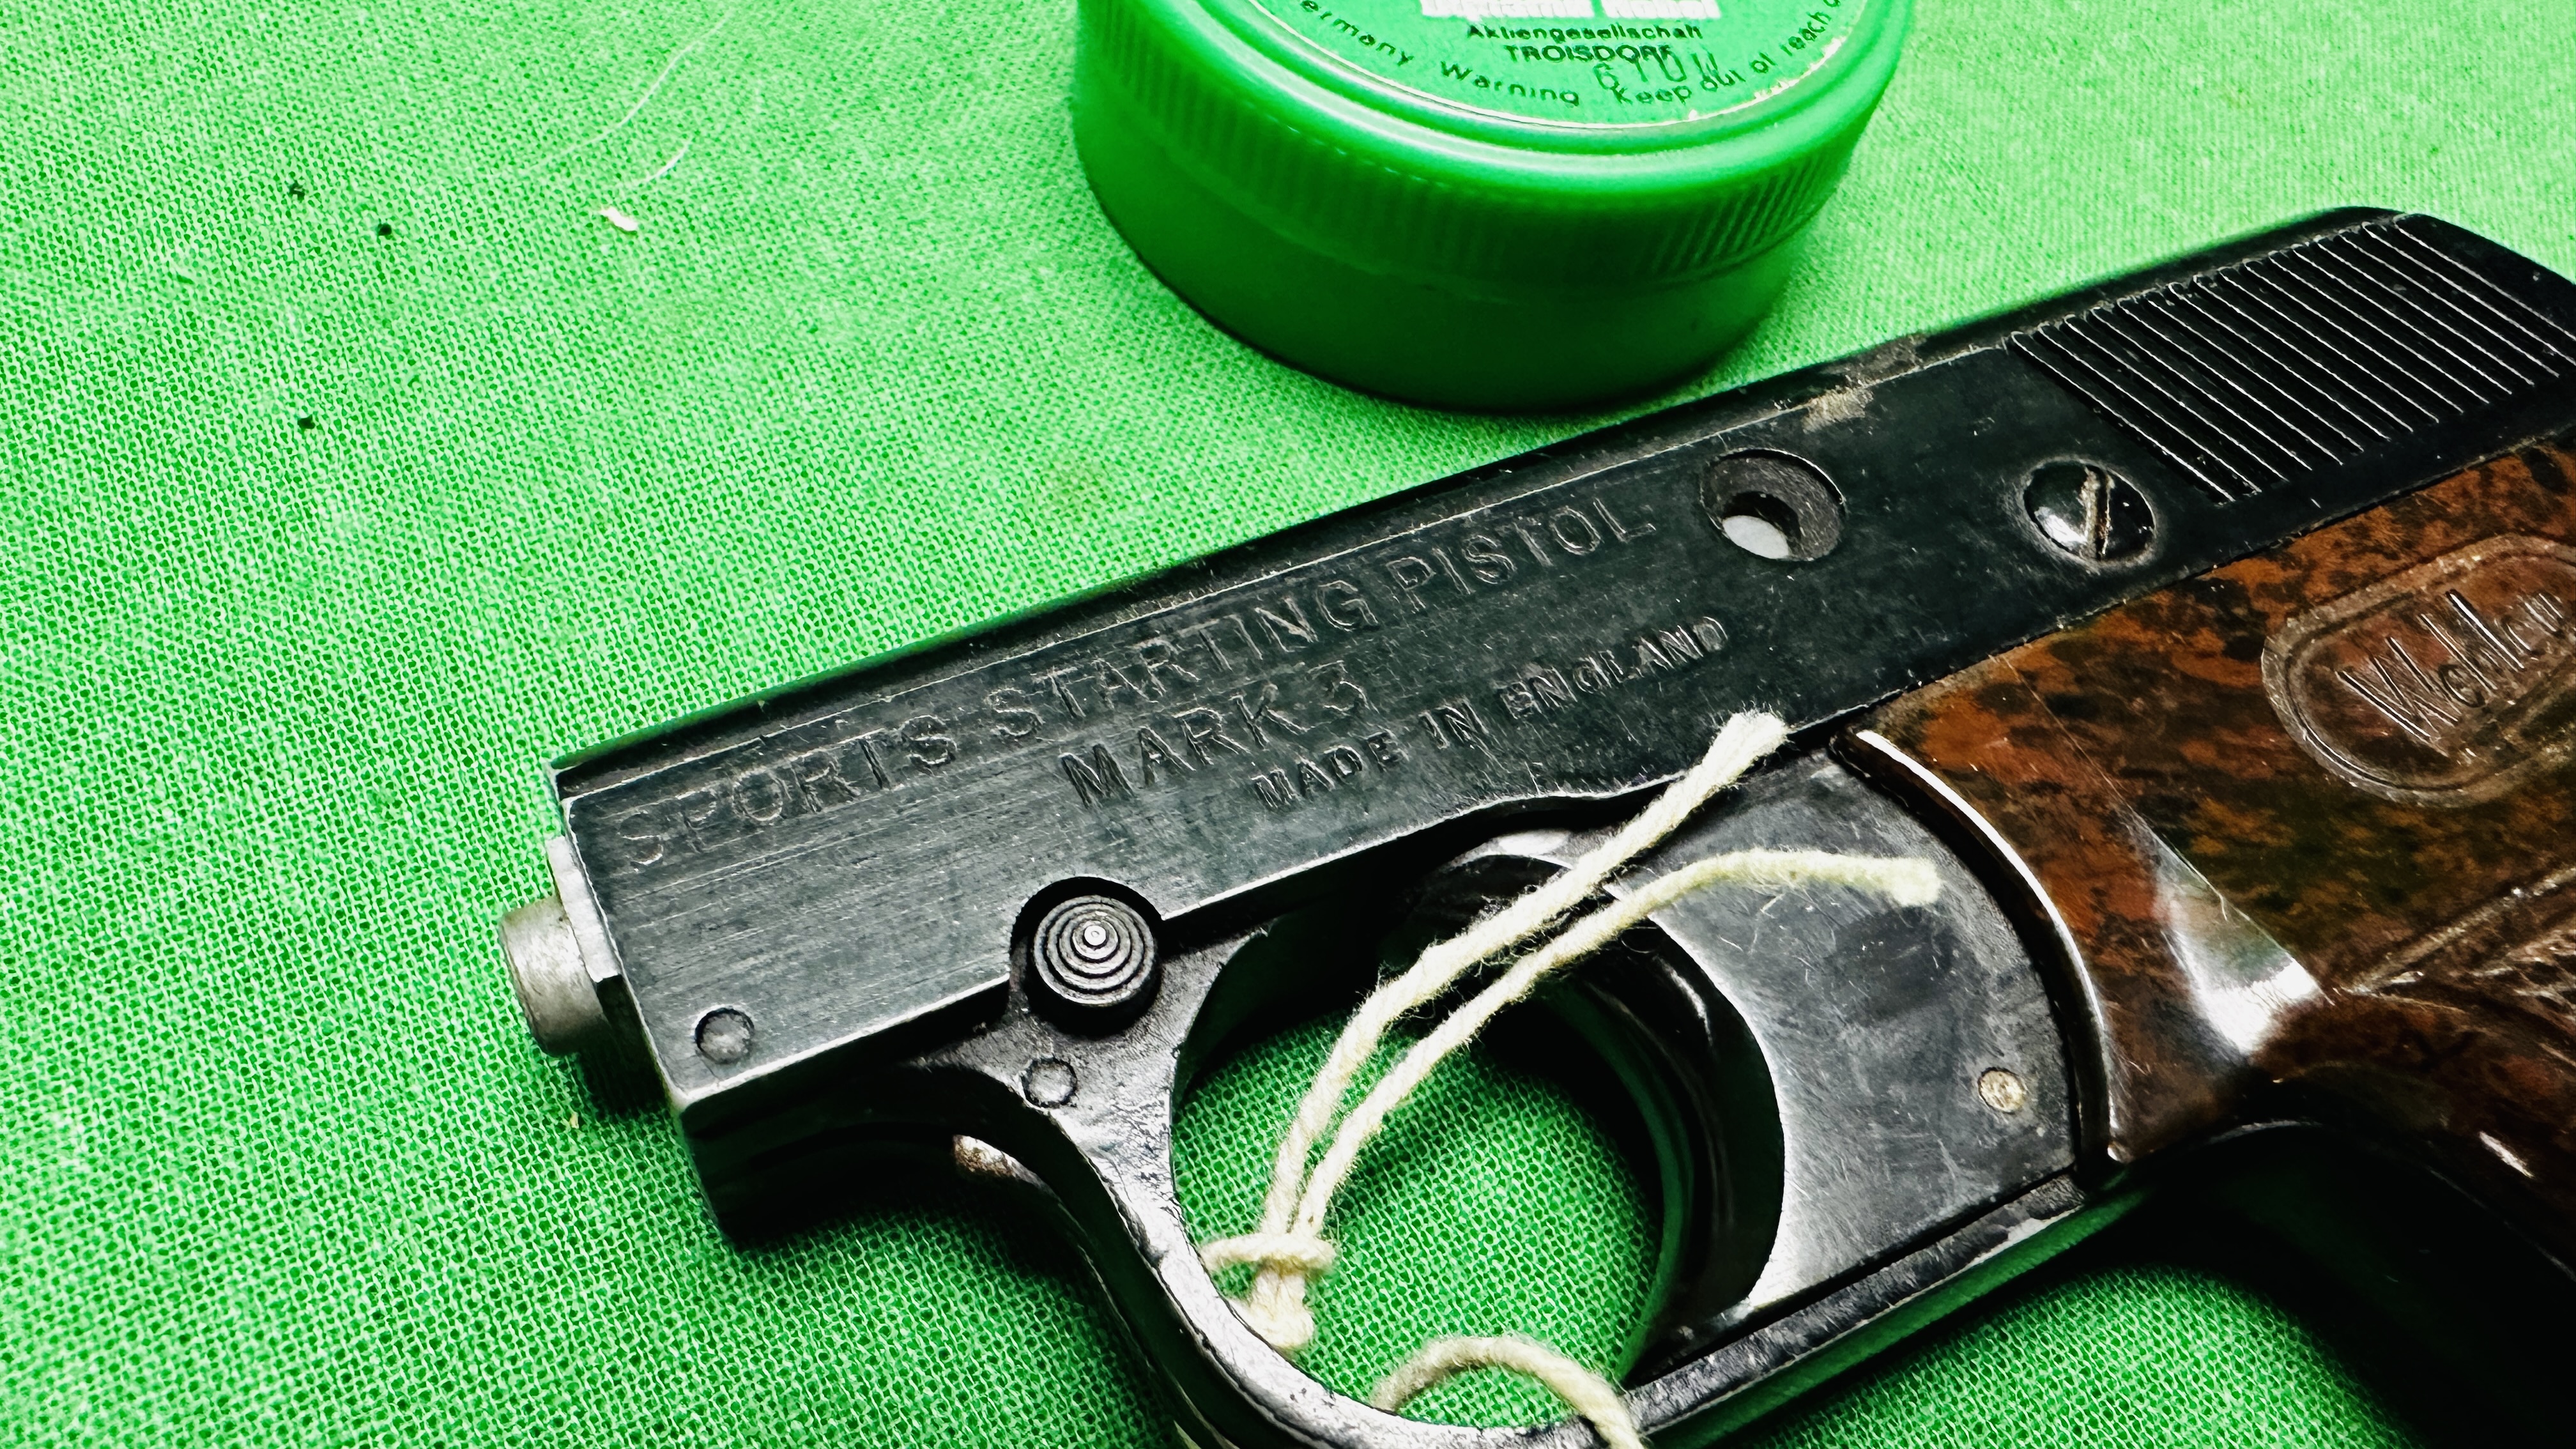 A VINTAGE WEBLEY SPORTS STARTING PISTOL MK3 WITH 6MM BLANKS - (ALL GUNS TO BE INSPECTED AND - Image 3 of 7